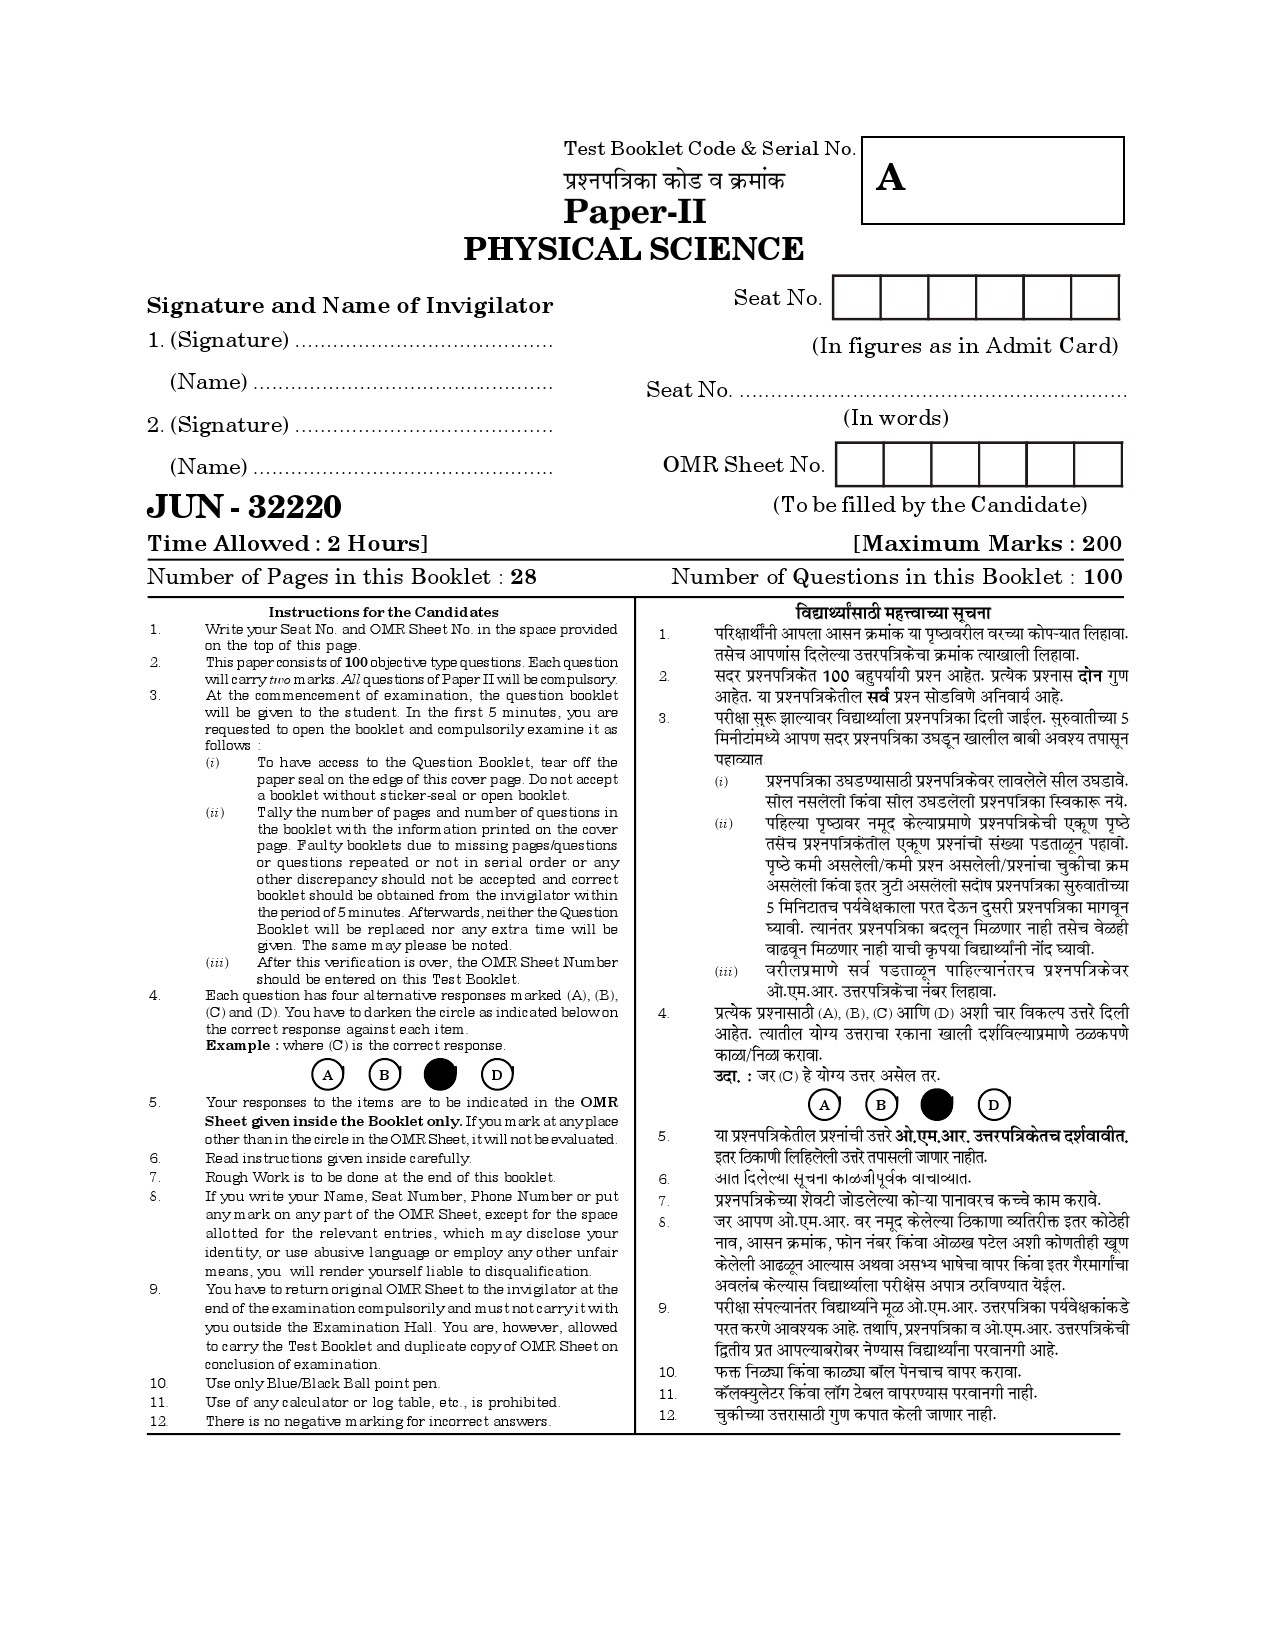 Maharashtra SET Physical Science Question Paper II June 2020 1